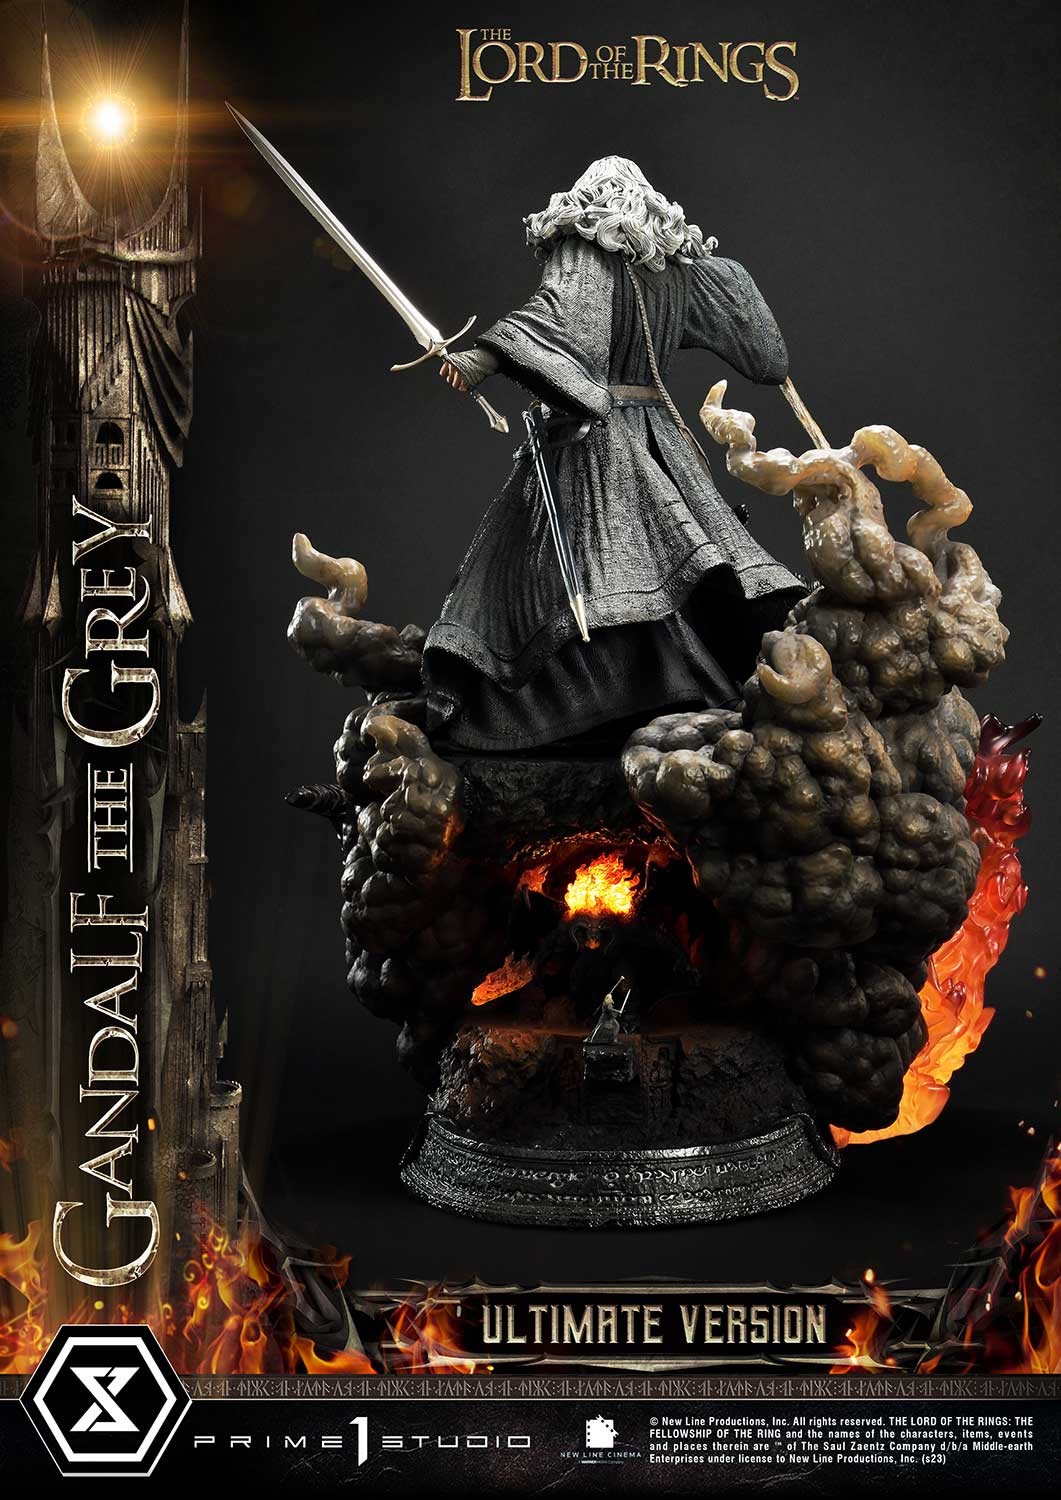 GANDALF THE GREY 1/4 Scale Statue Gandalf-the-grey-ultimate-version_the-lord-of-the-rings_gallery_64c425bc1afb6